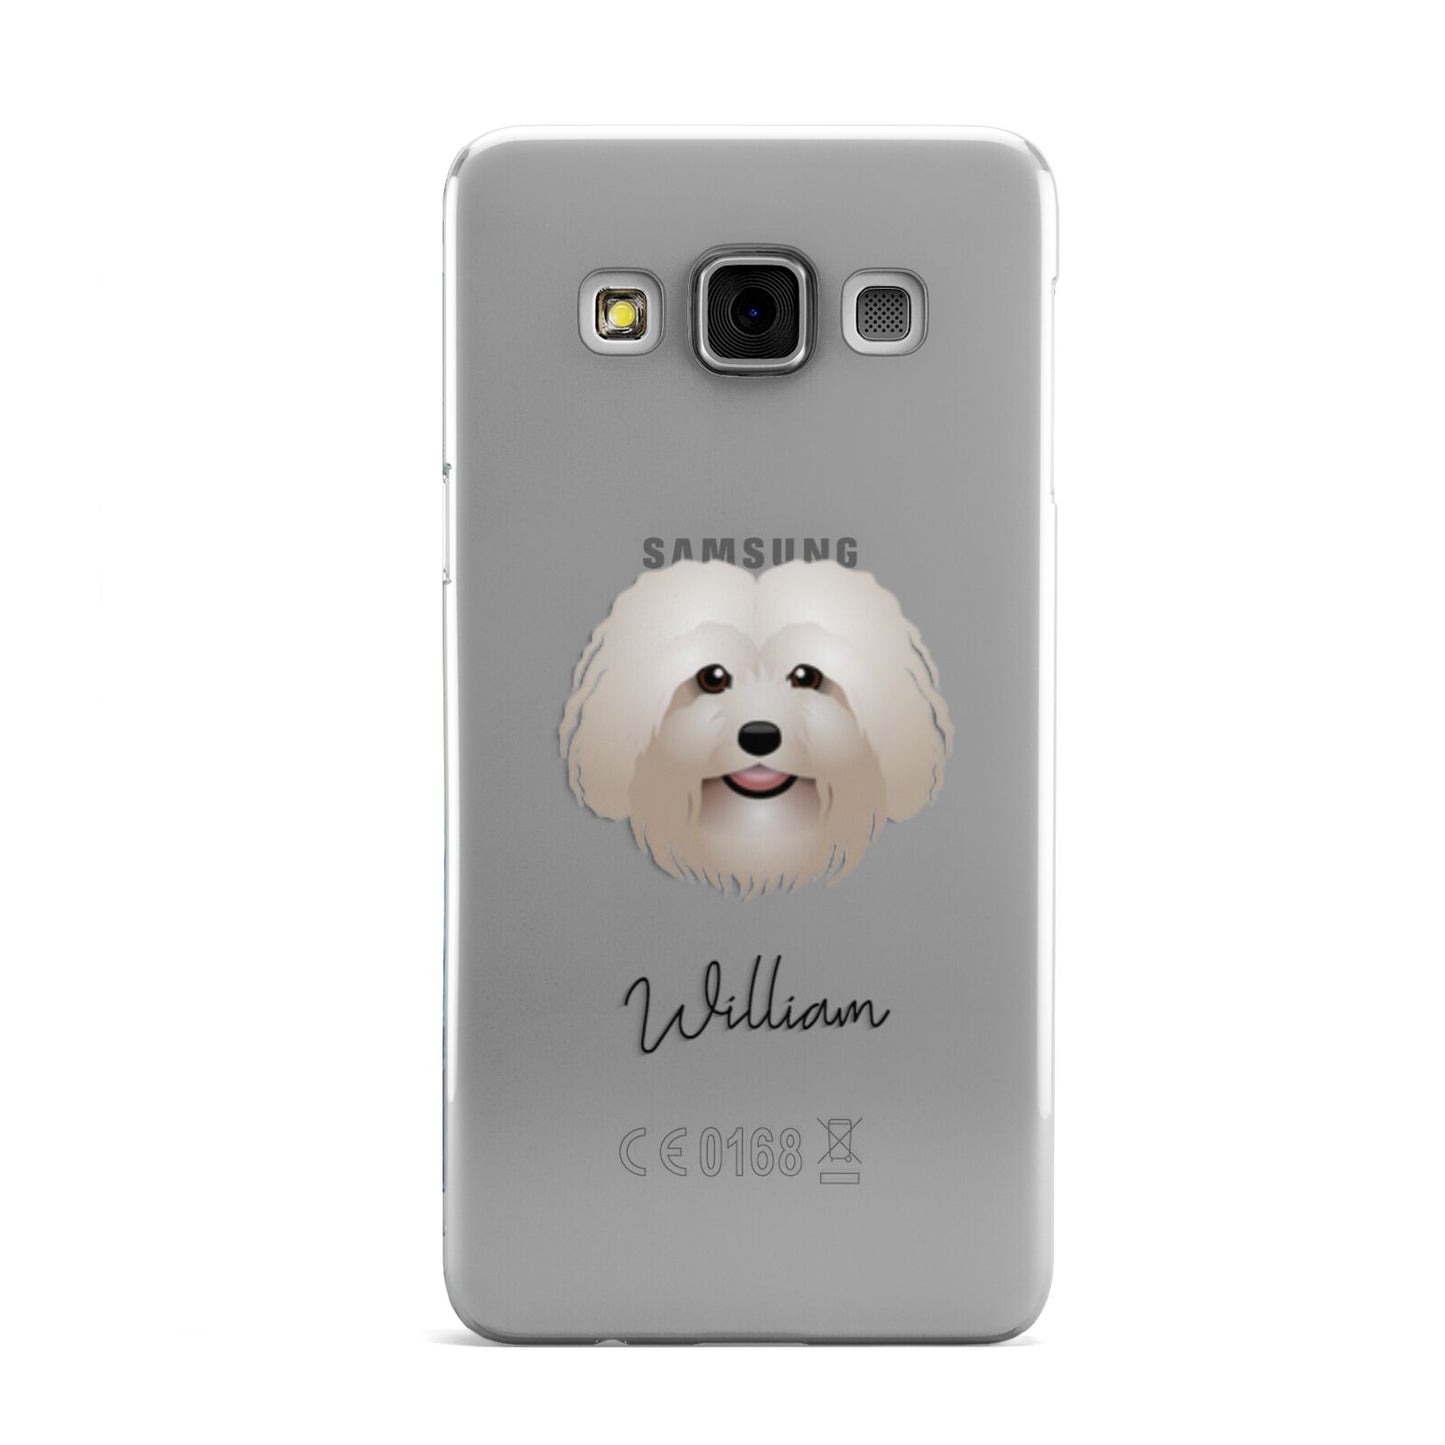 Bolognese Personalised Samsung Galaxy A3 Case